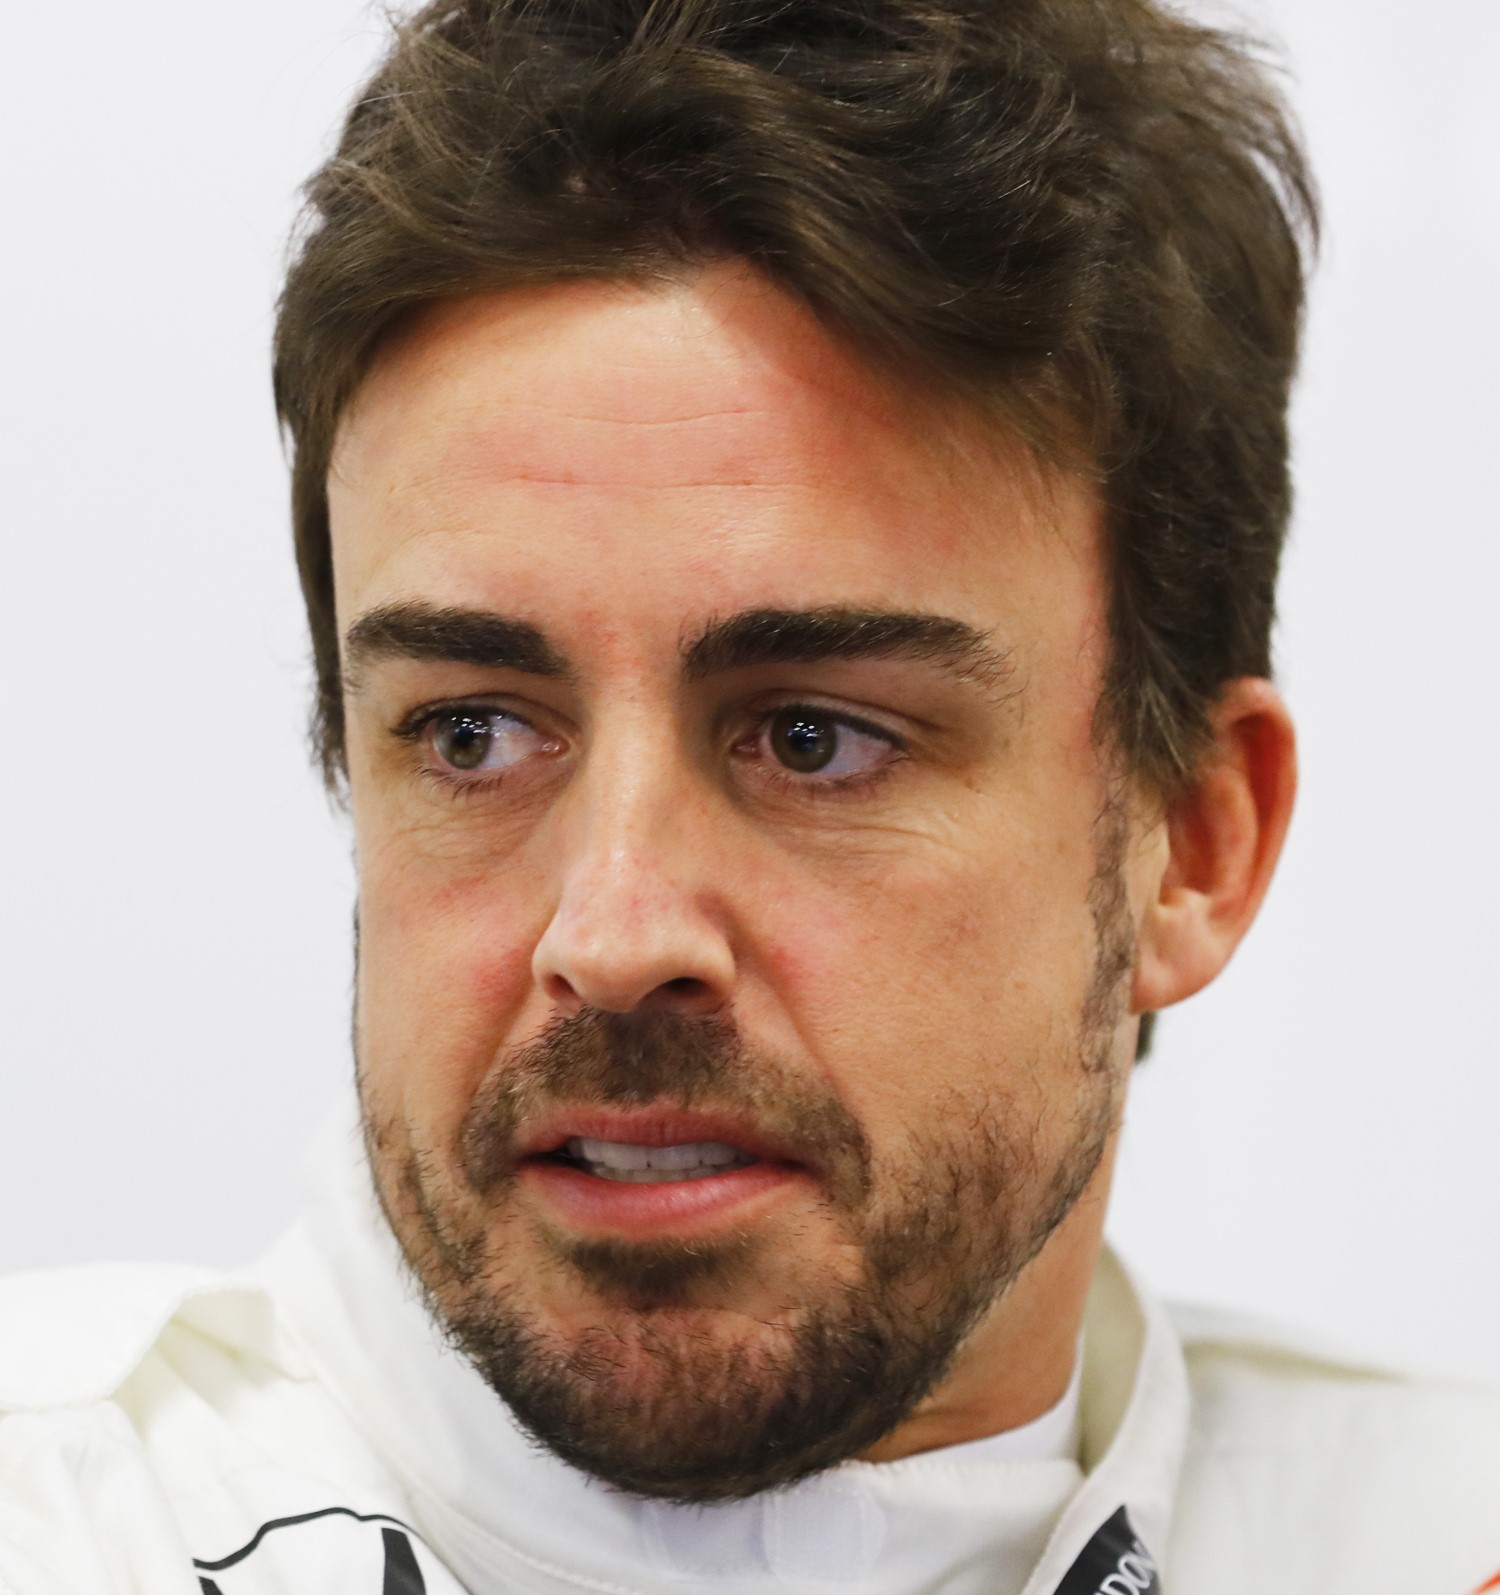 While Mercedes won't take Alonso, Renault would be happy to